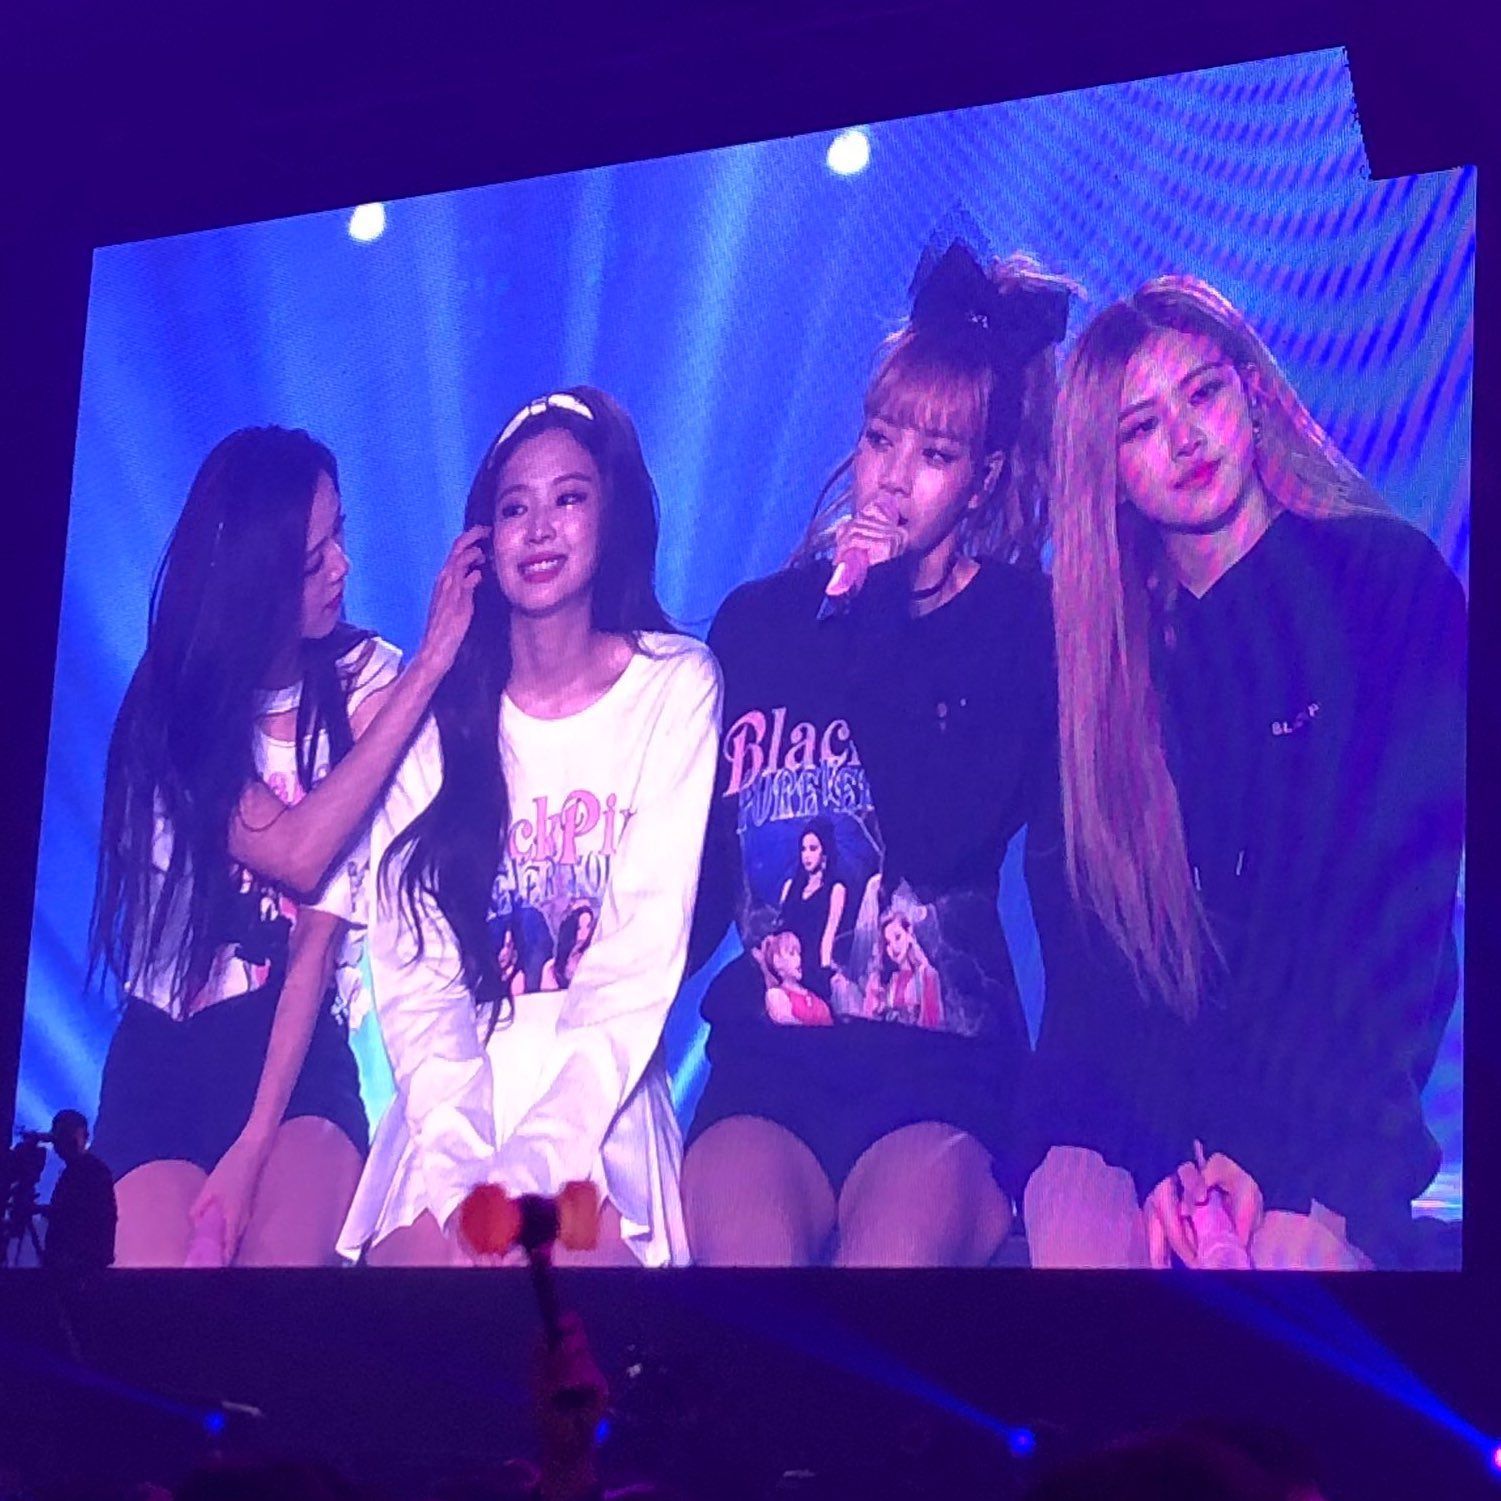 Jennie cried when the concert was over. Blackpink, Kpop girl